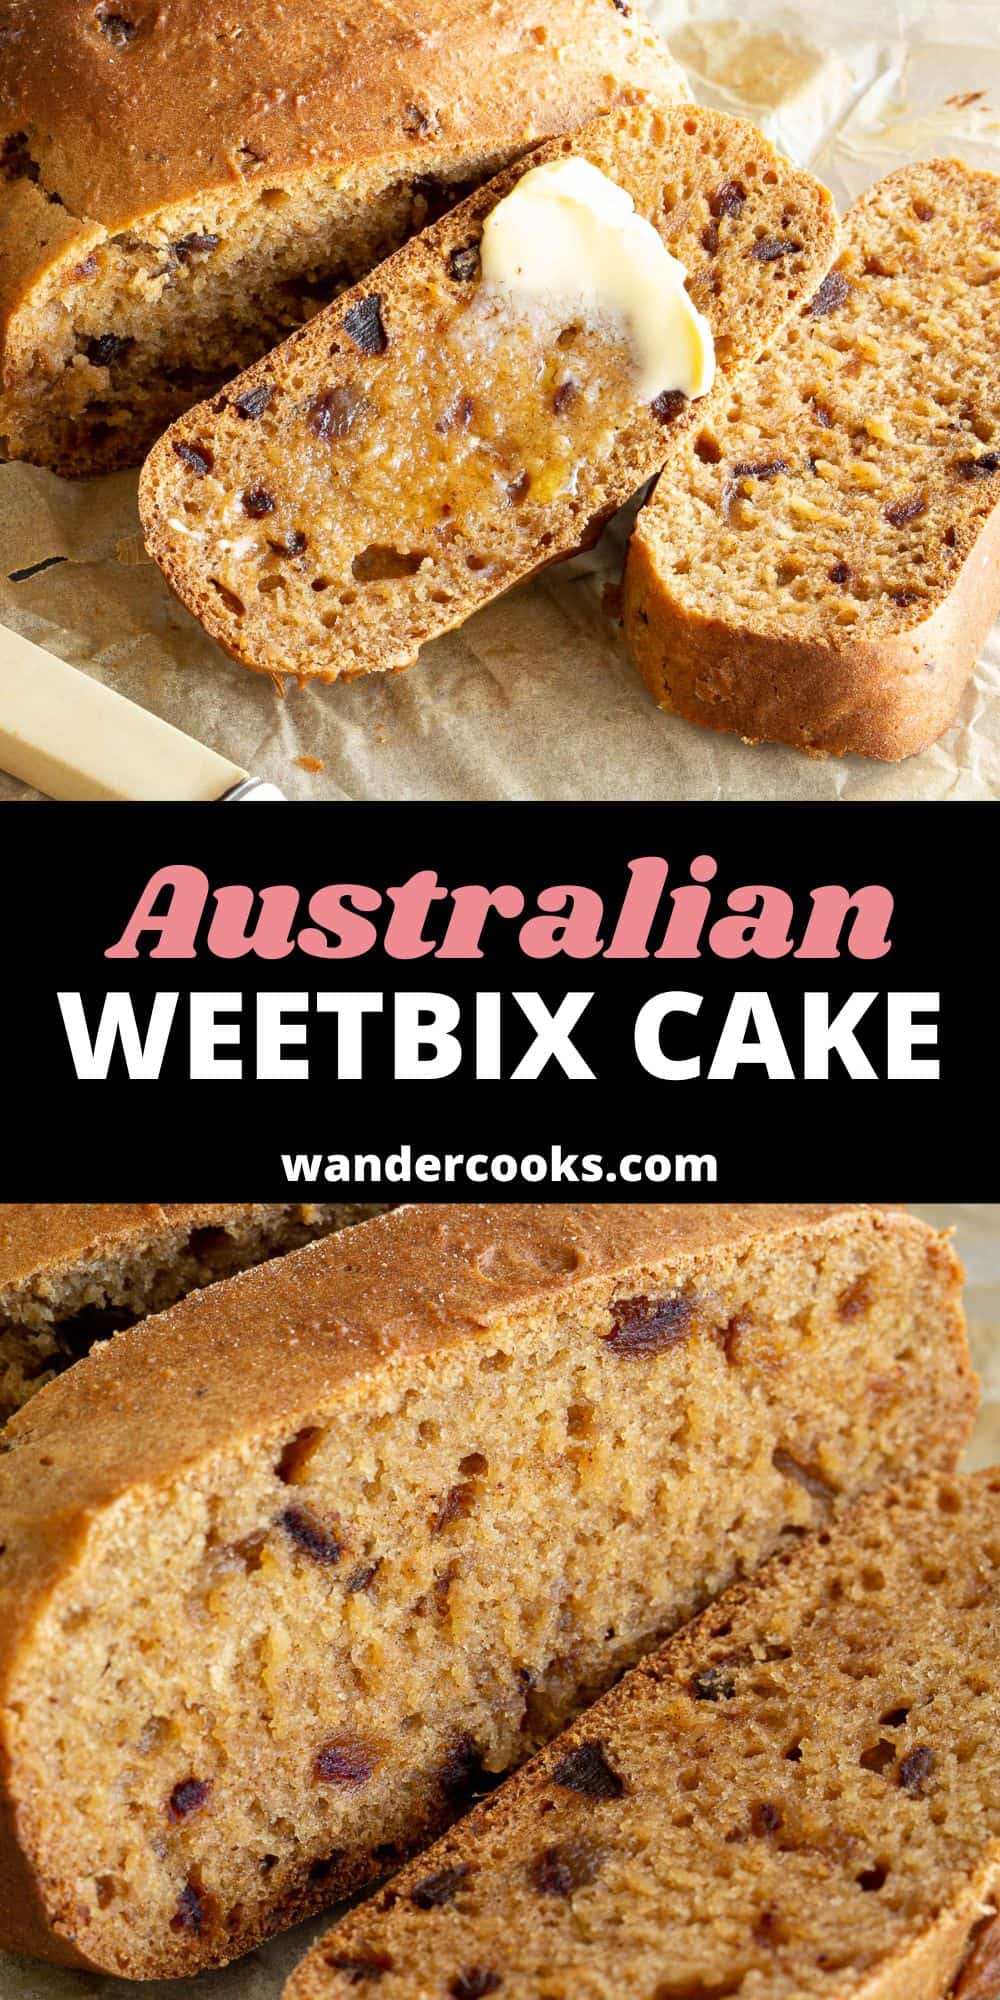 Weetbix Cake with Dates - Easy Date Loaf